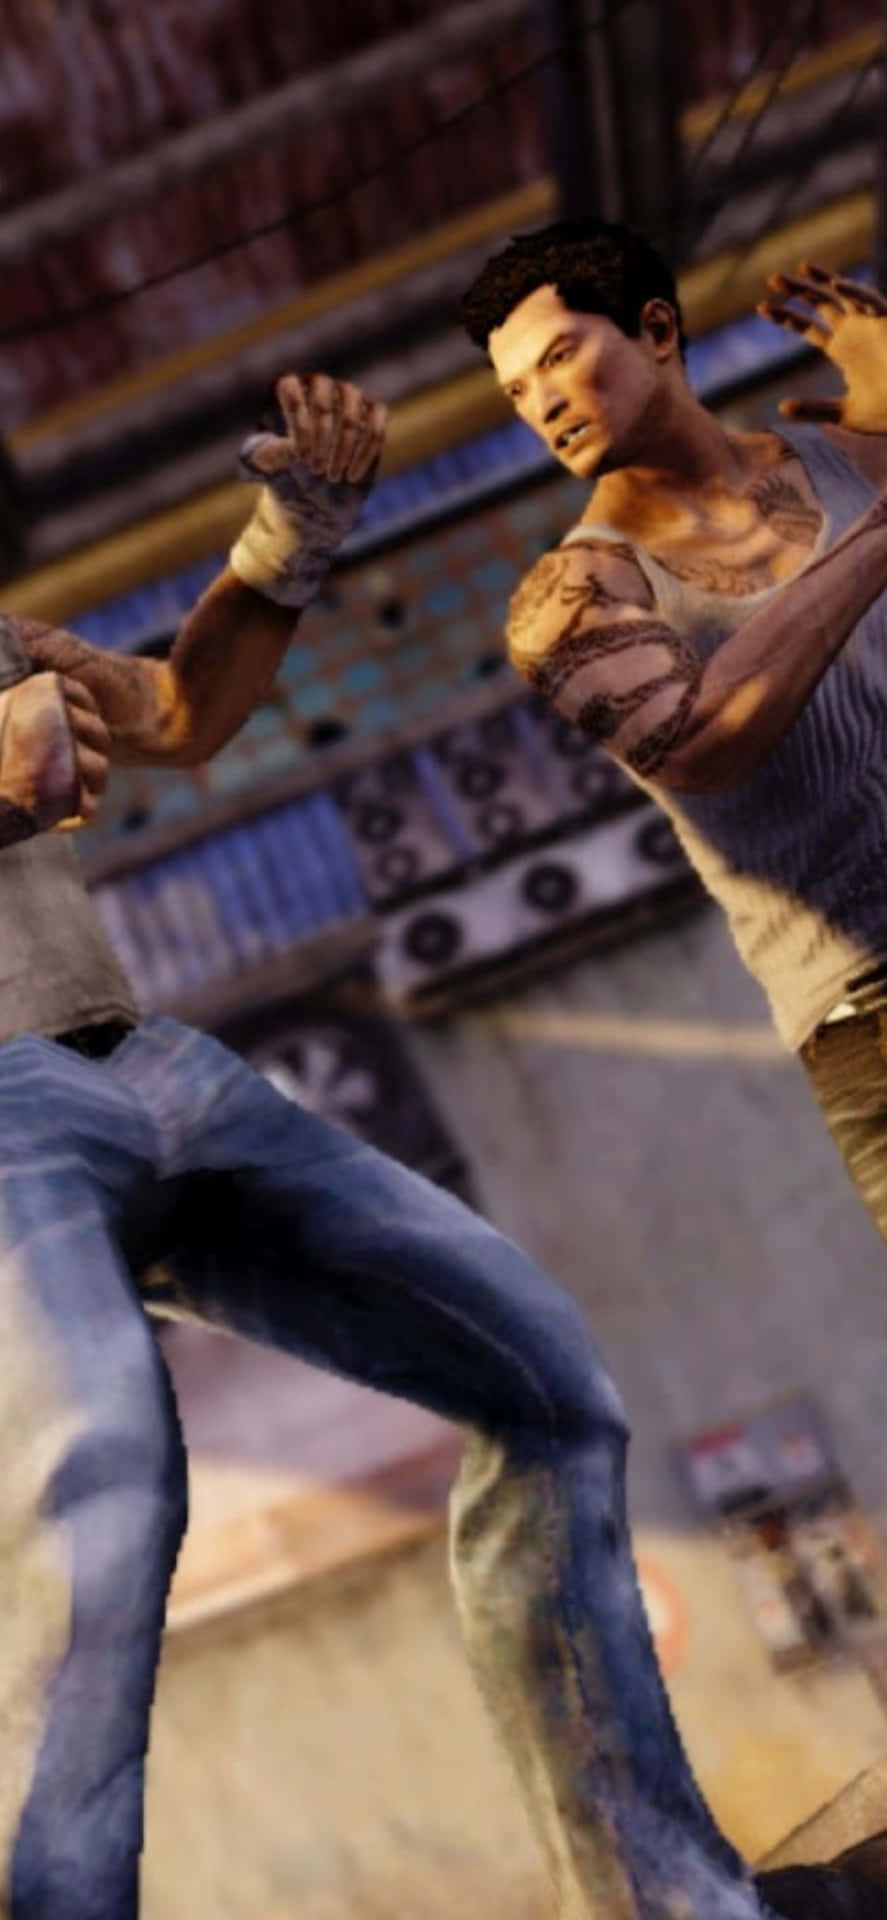 Iphone Xs Sleeping Dogs Fist Fight Background